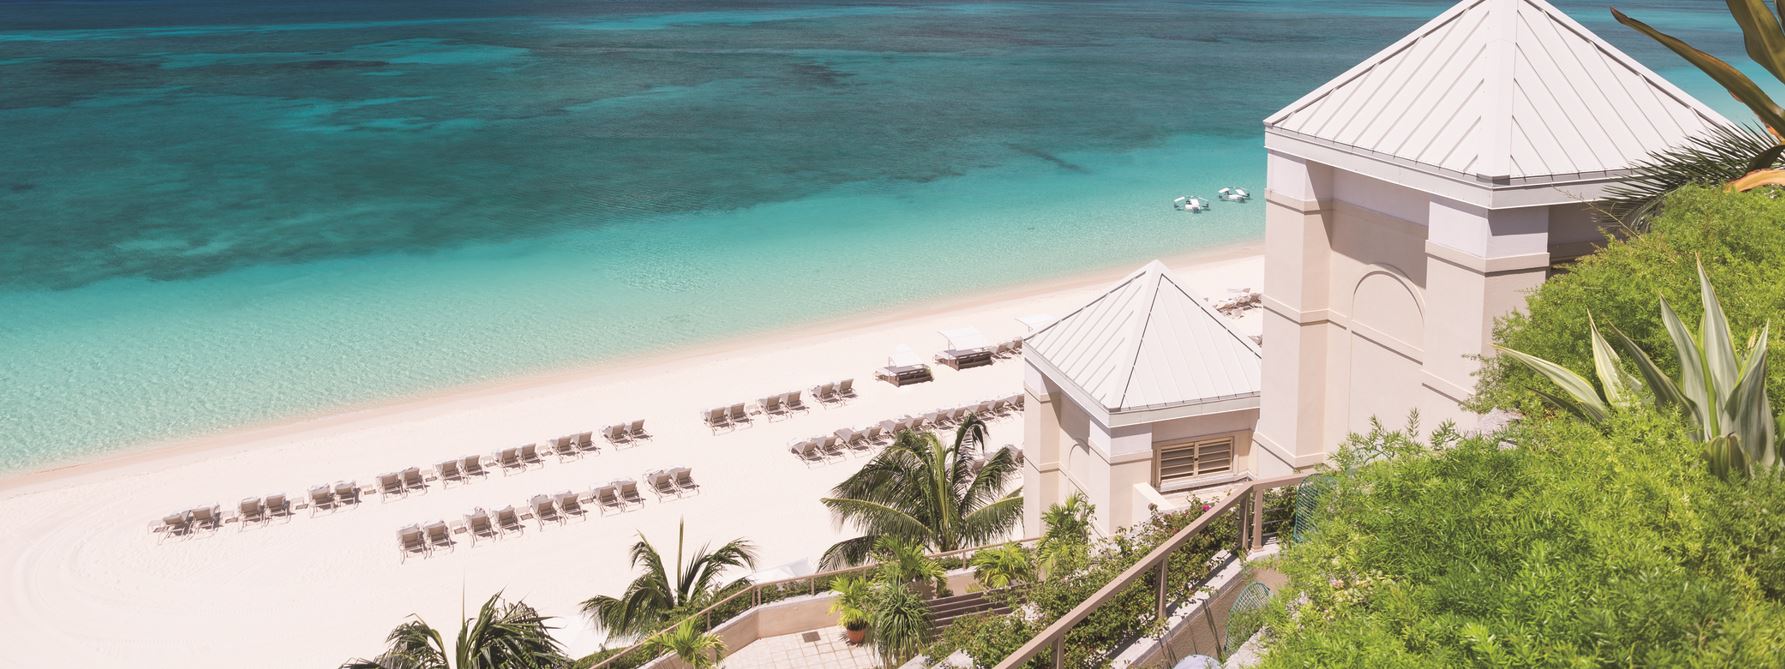 Luxury Getaway to the Cayman Islands: Places to Stay, Dine, Explore